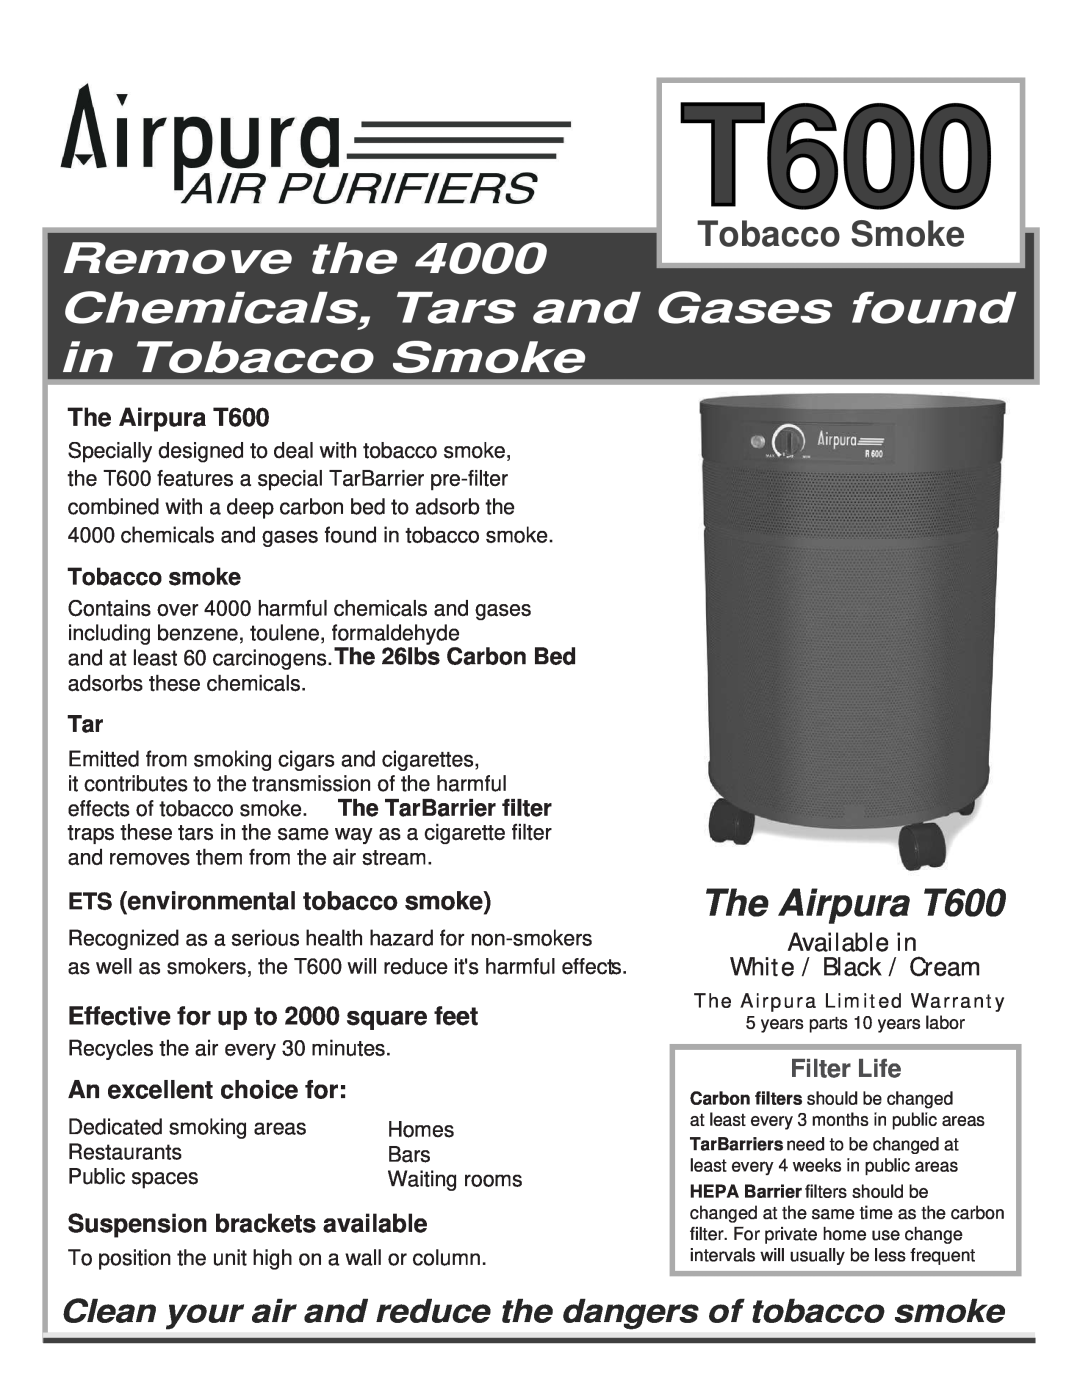 NewAir warranty The Airpura T600, Clean your air and reduce the dangers of tobacco smoke, Filter Life, Available in 